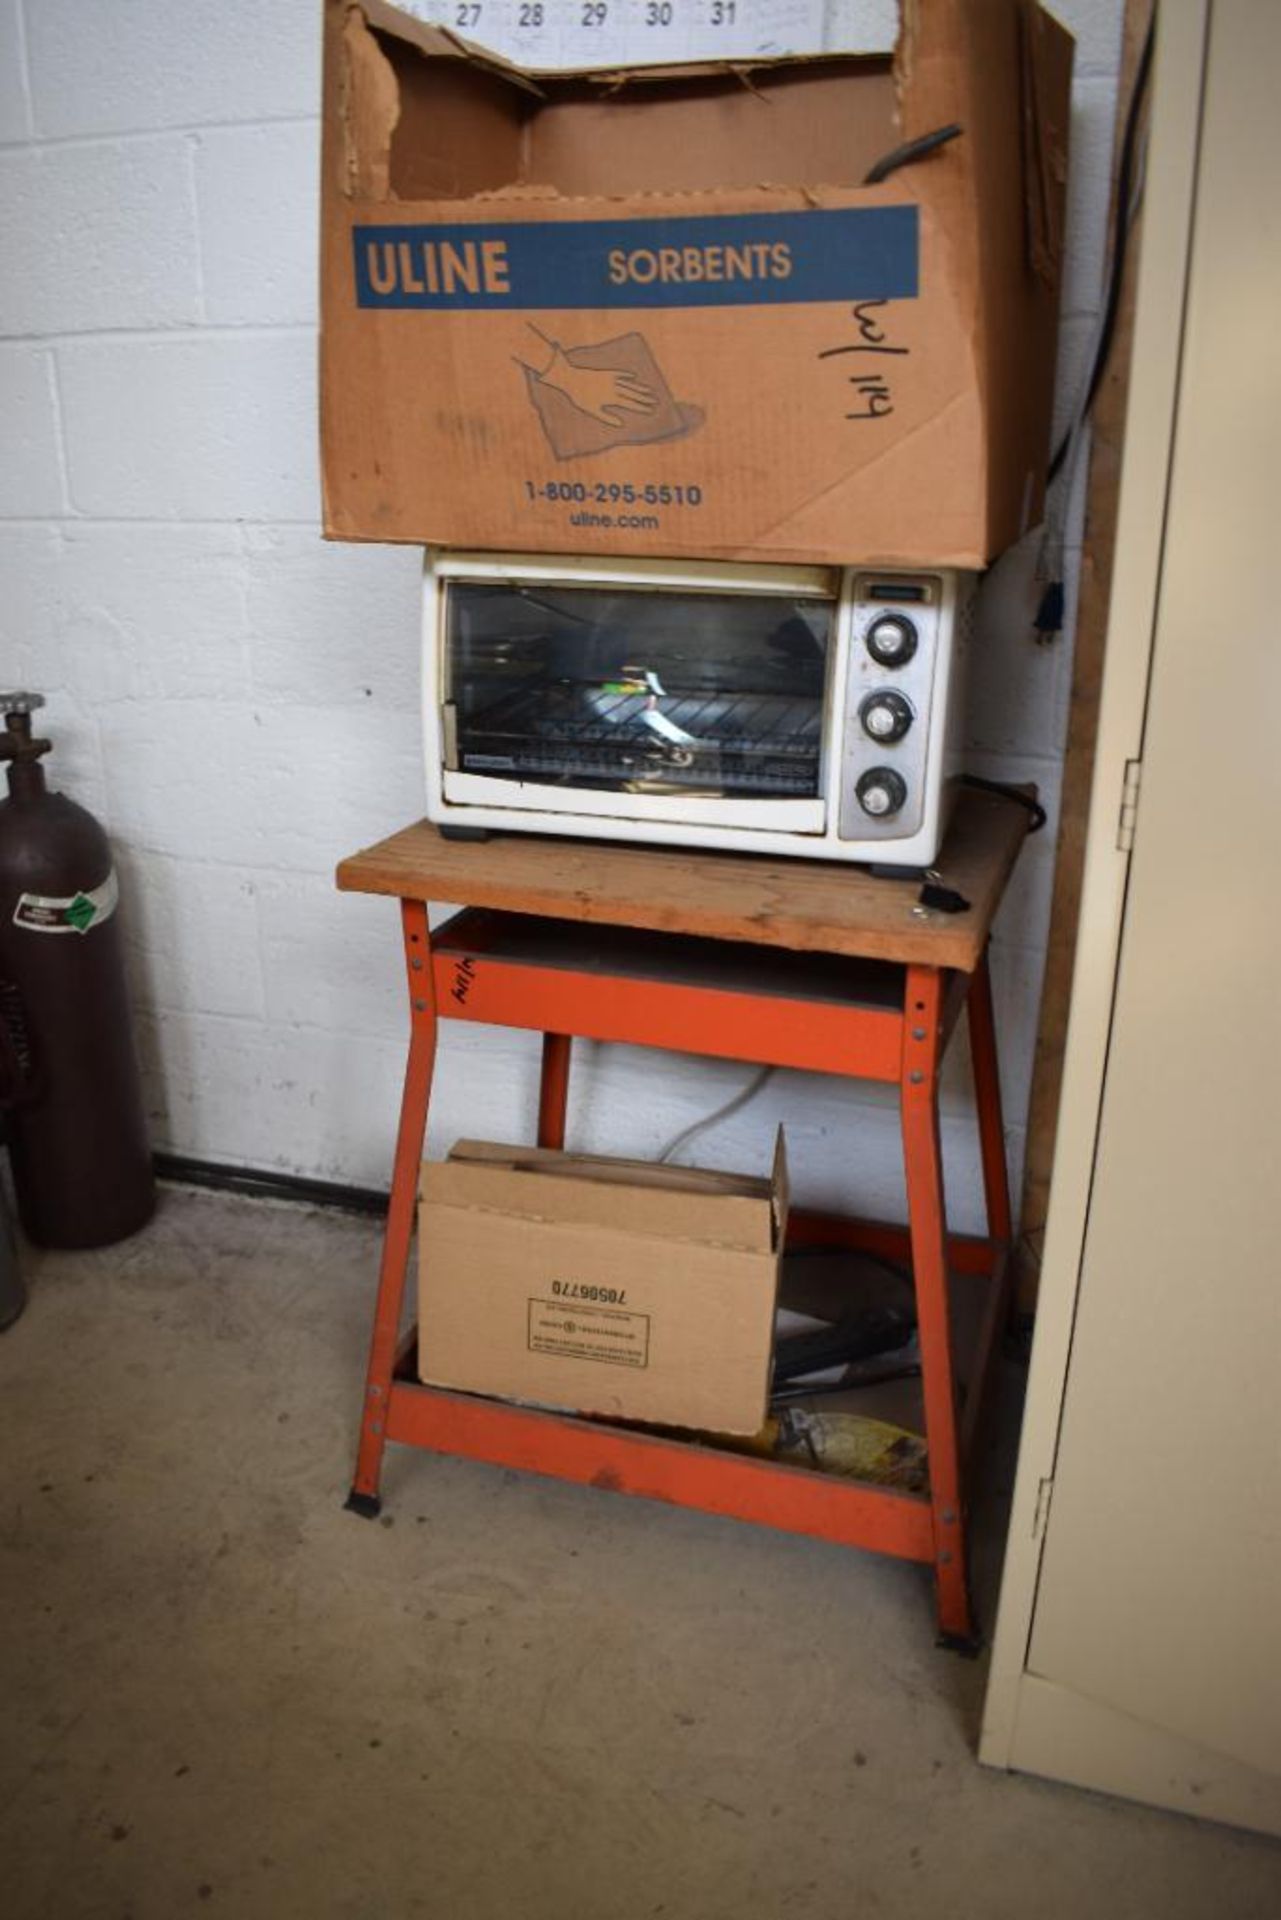 Lot Consisting Of: (1) 2 Door metal cabinet miscellaneous, fan, metal stand, toaster oven, torch, mi - Image 2 of 8